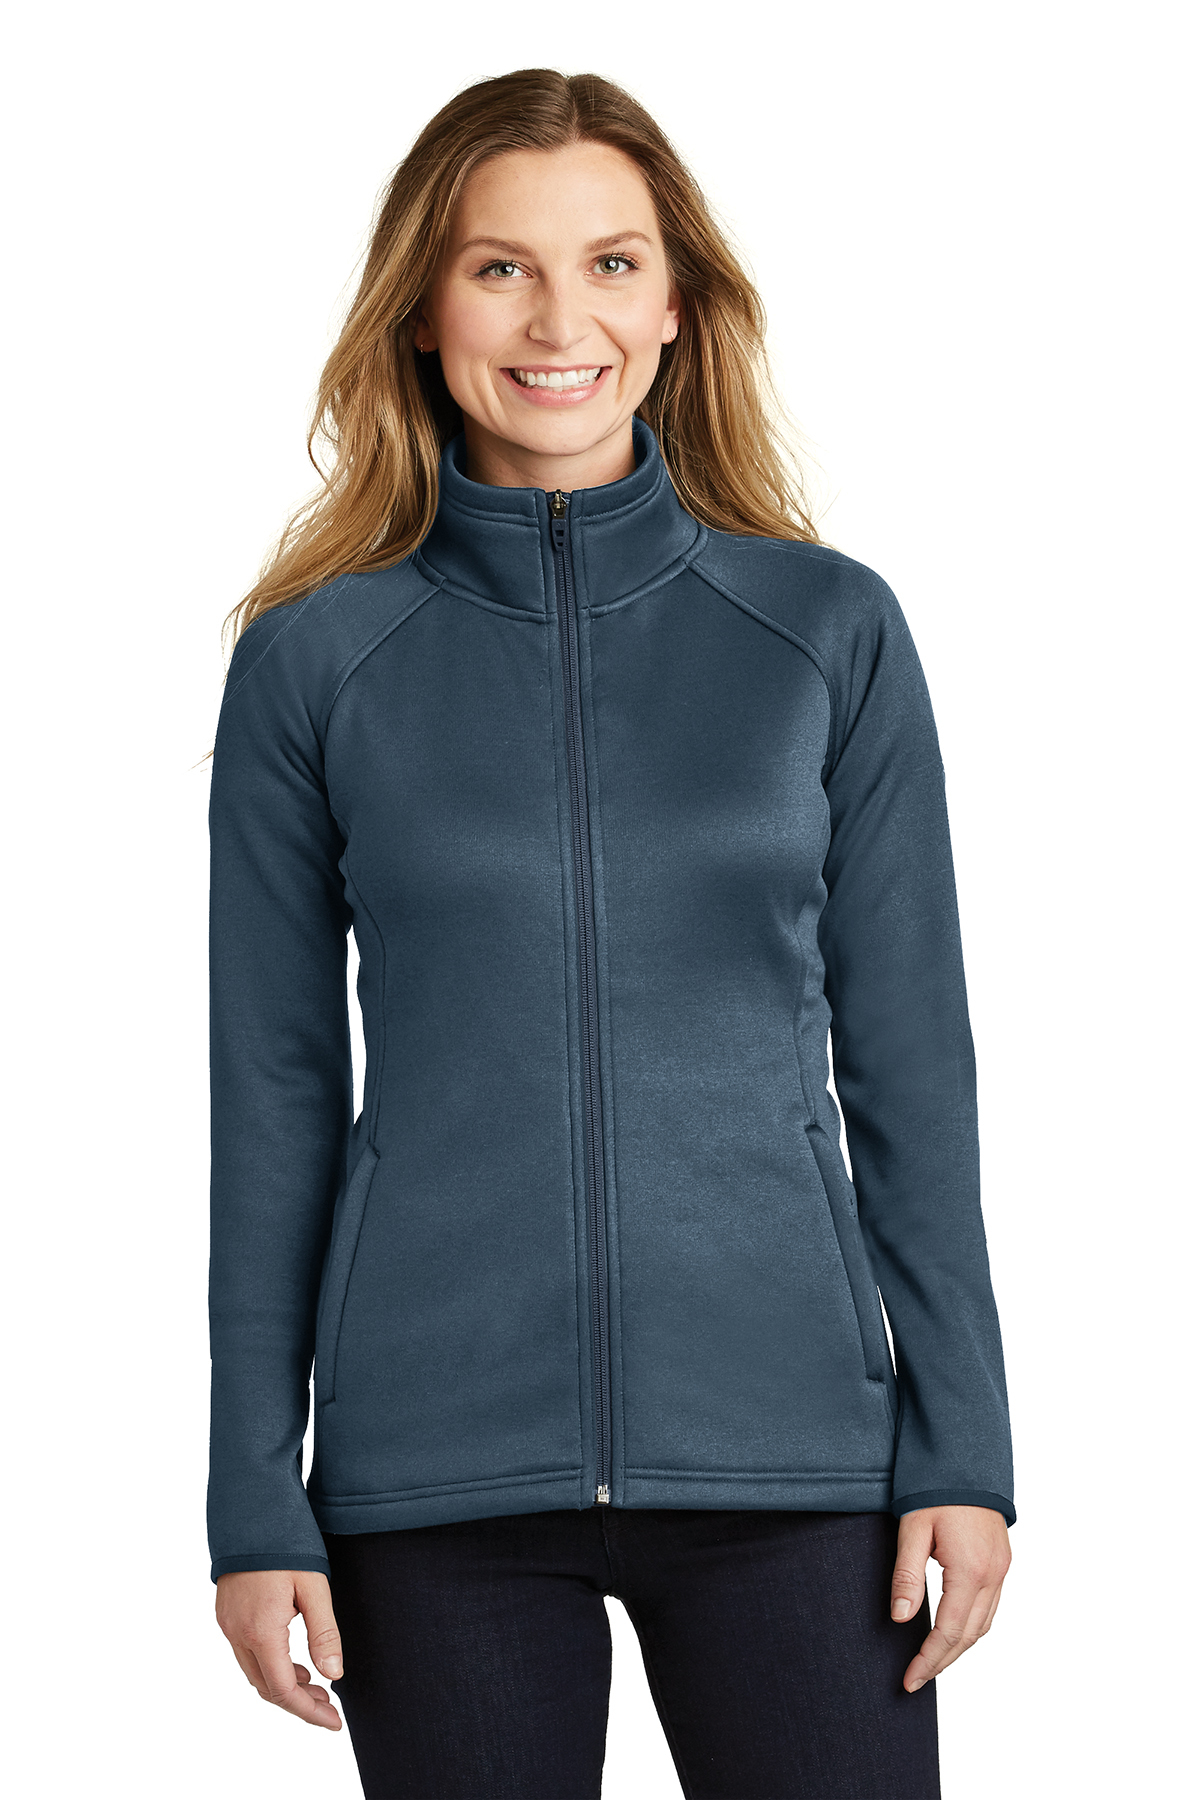 The North Face Ladies Canyon Flats Stretch Fleece Jacket, Product